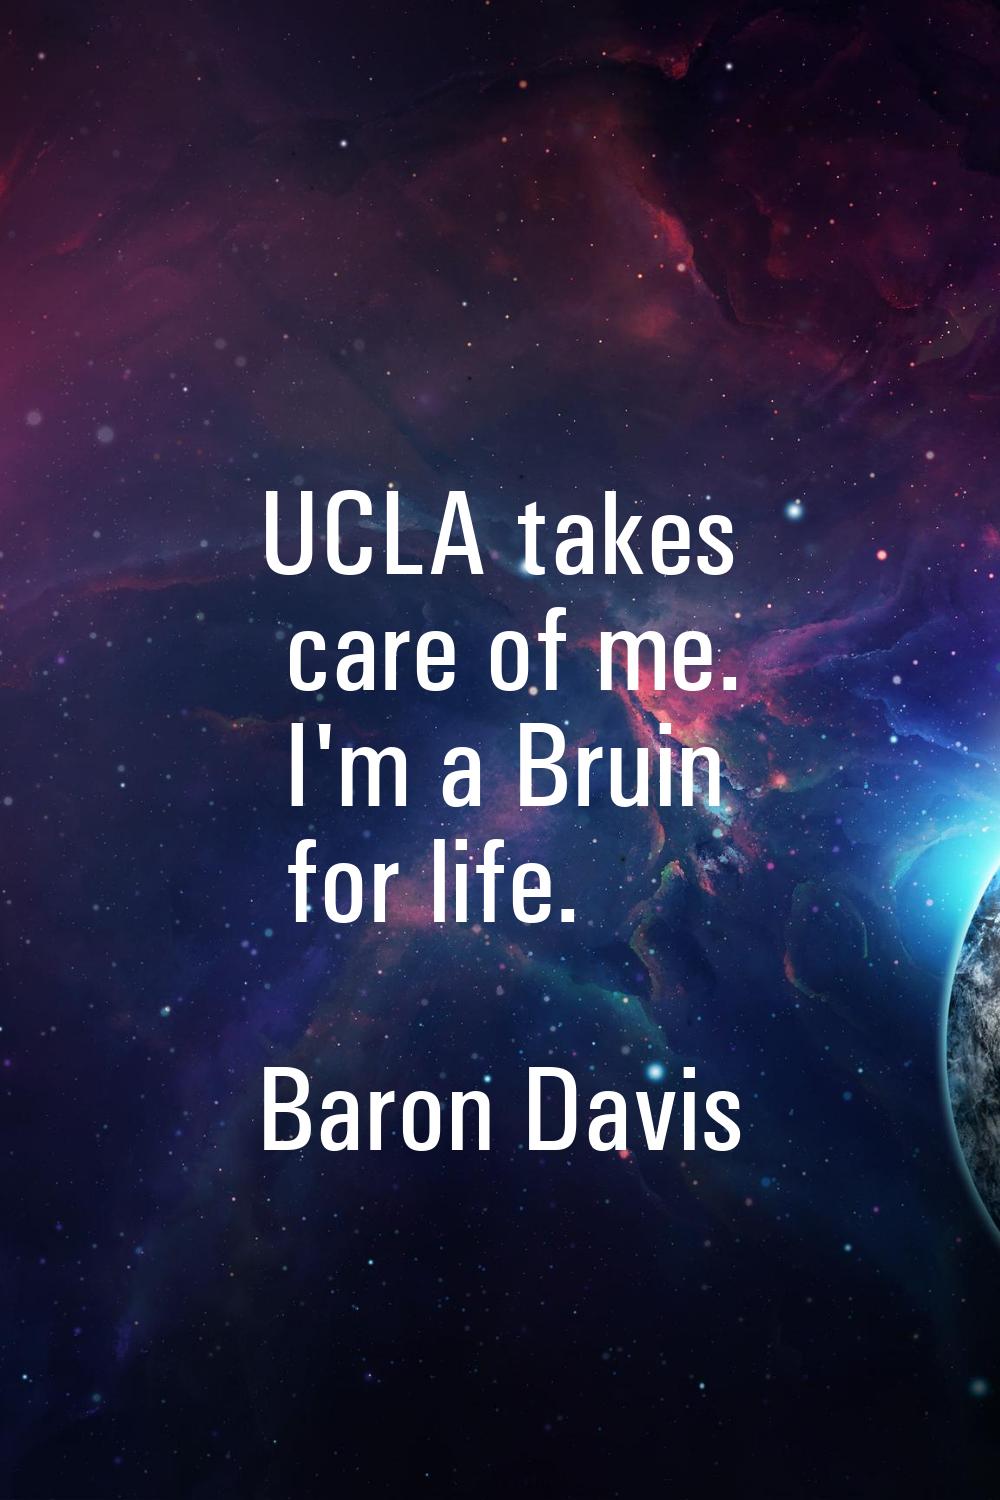 UCLA takes care of me. I'm a Bruin for life.